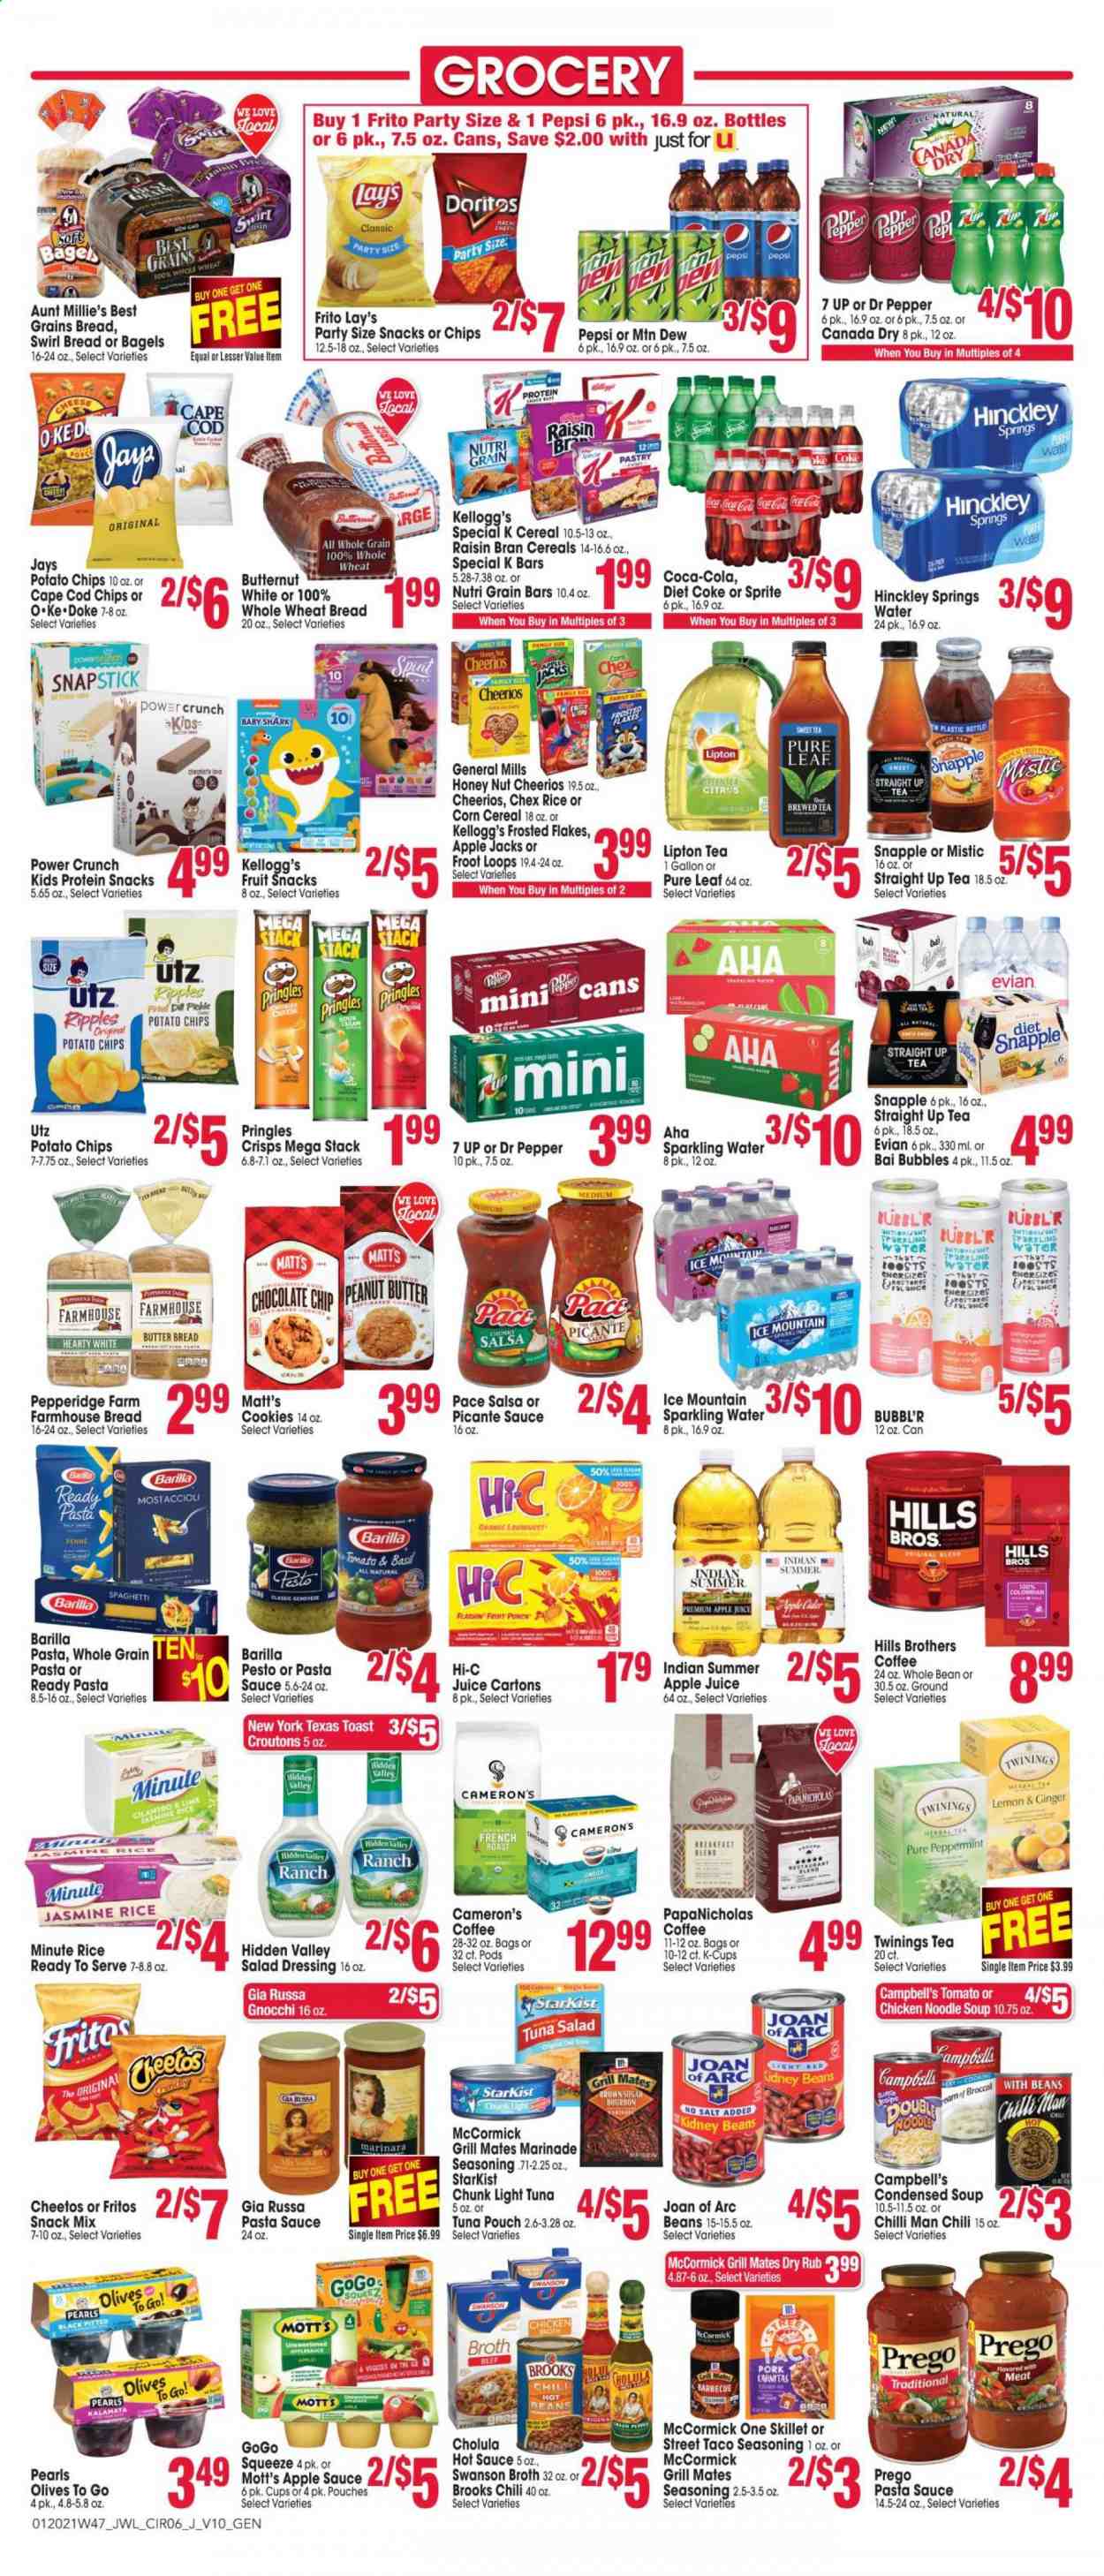 thumbnail - Jewel Osco Flyer - 01/20/2021 - 01/26/2021 - Sales products - wheat bread, toast bread, bagels, oranges, cod, tuna, StarKist, Campbell's, gnocchi, condensed soup, soup, sauce, Barilla, tuna salad, sour cream, salsa, corn, cookies, Kellogg's, fruit snack, croutons, Doritos, potato chips, Pringles, Cheetos, chips, Lay’s, cane sugar, chicken broth, broth, kidney beans, olives, light tuna, cereals, Fritos, Cheerios, Frosted Flakes, Raisin Bran, Nutri-Grain, spaghetti, jasmine rice, noodles, penne, cilantro, marinade, salad dressing, hot sauce, pesto, pasta sauce, dressing, apple sauce, peanuts, apple juice, Canada Dry, Coca-Cola, Mountain Dew, Sprite, Pepsi, juice, Lipton, Dr. Pepper, Hi-c, Diet Coke, 7UP, Snapple, Bai, Mott's, sparkling water, Ice Mountain, tea, Twinings, Pure Leaf, coffee, coffee capsules, K-Cups, bourbon, BROTHERS, bourbon whiskey, Hill's, vitamin c. Page 6.